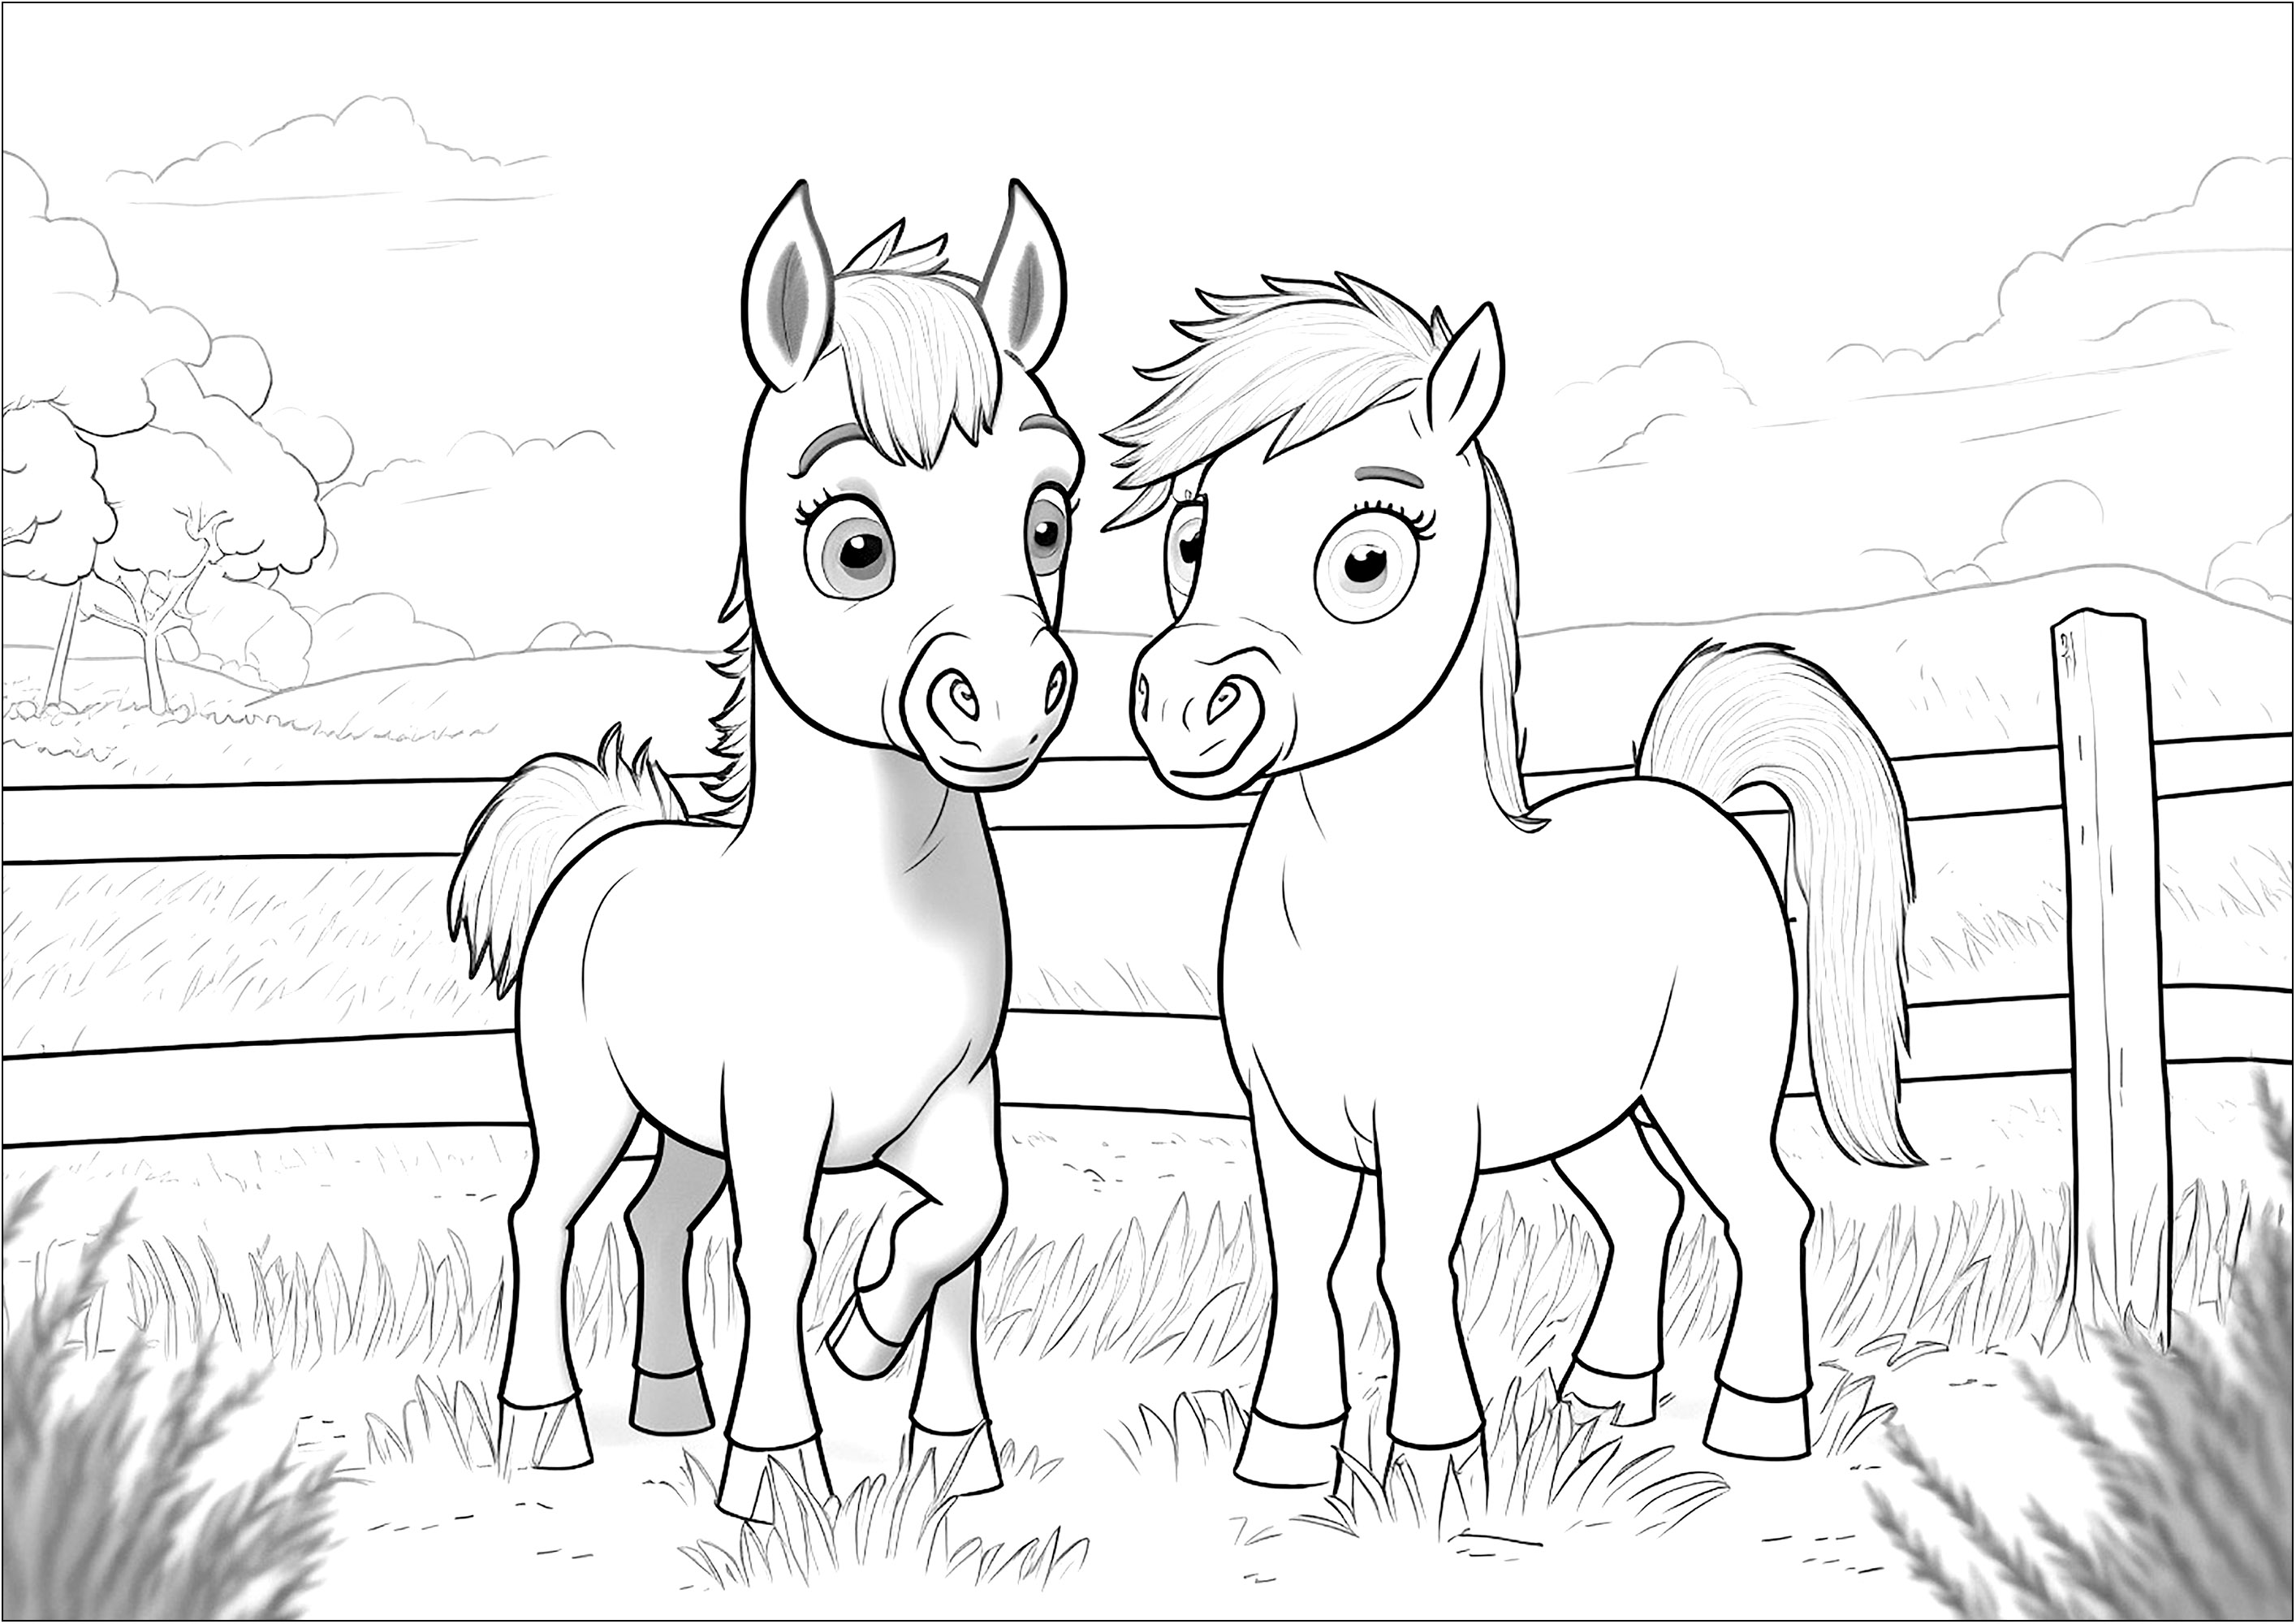 Two pretty horses to color. This coloring page is perfect for children who love horses and the world of horseback riding. It features two horses in their paddock, with a nice background of trees, plains and clouds.